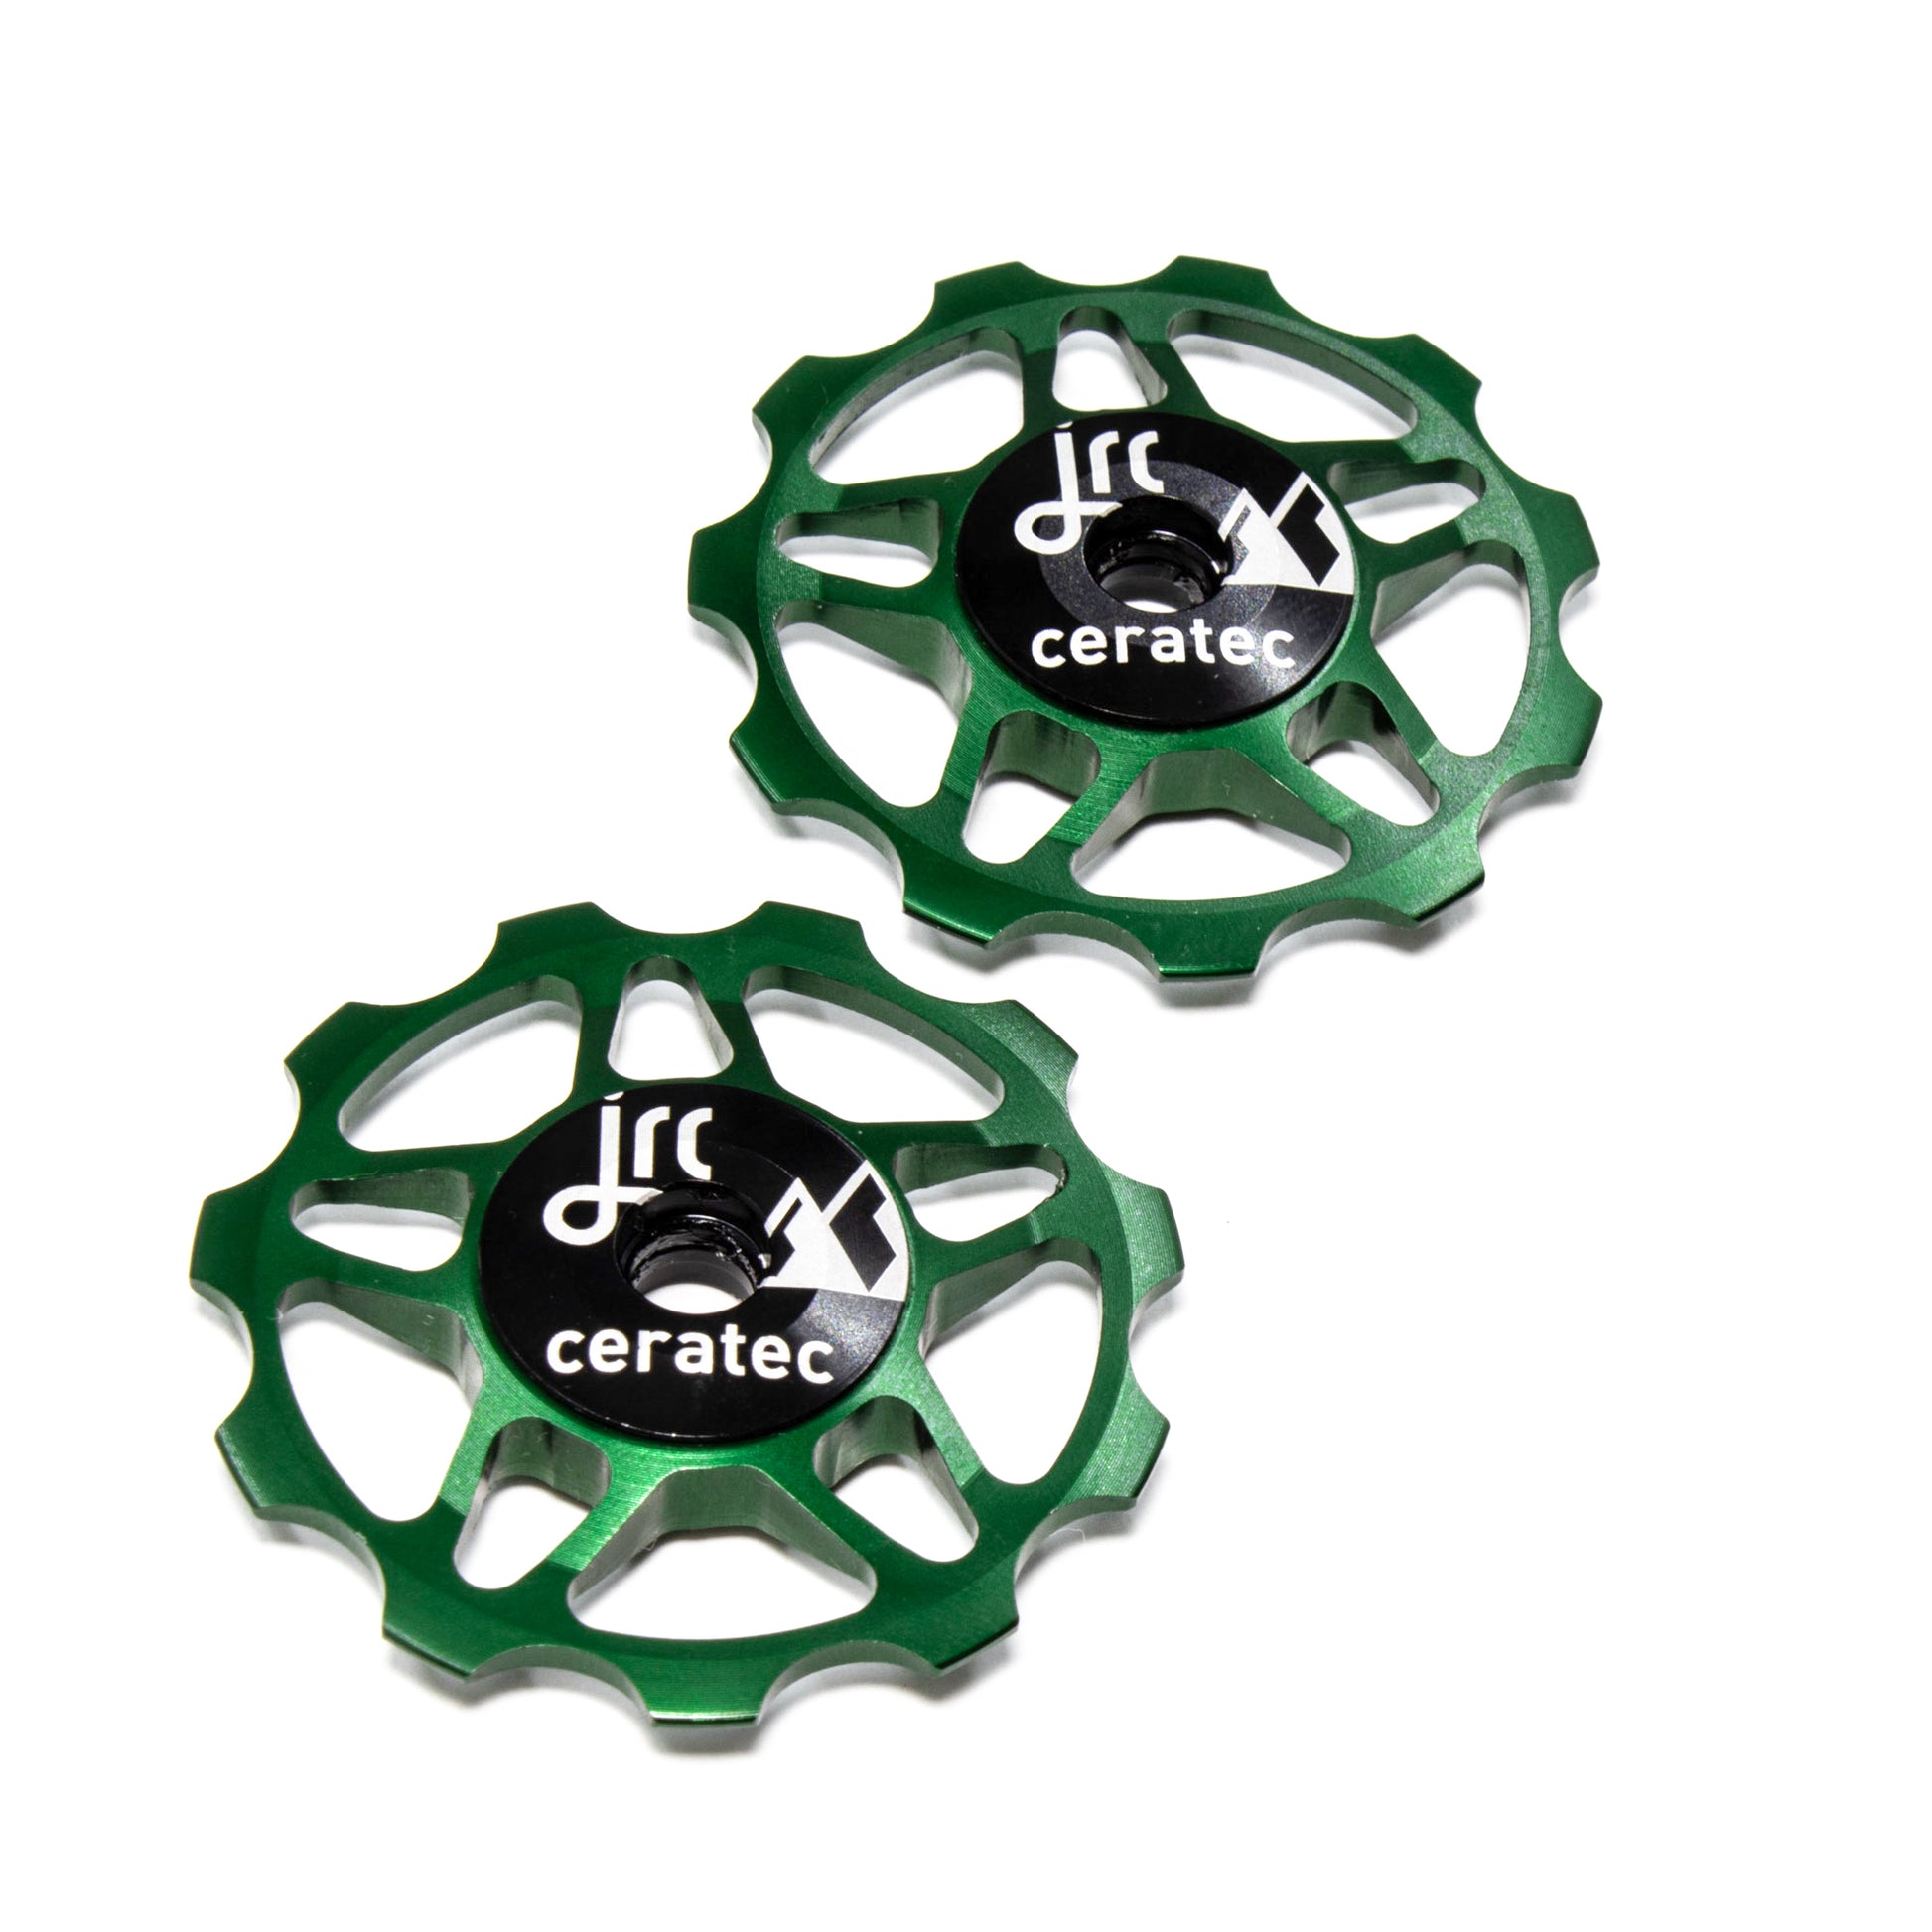 Emerald green, lightweight aluminium 11 tooth pulley wheel set for bicycles, for Shimano SRAM and Campagnolo